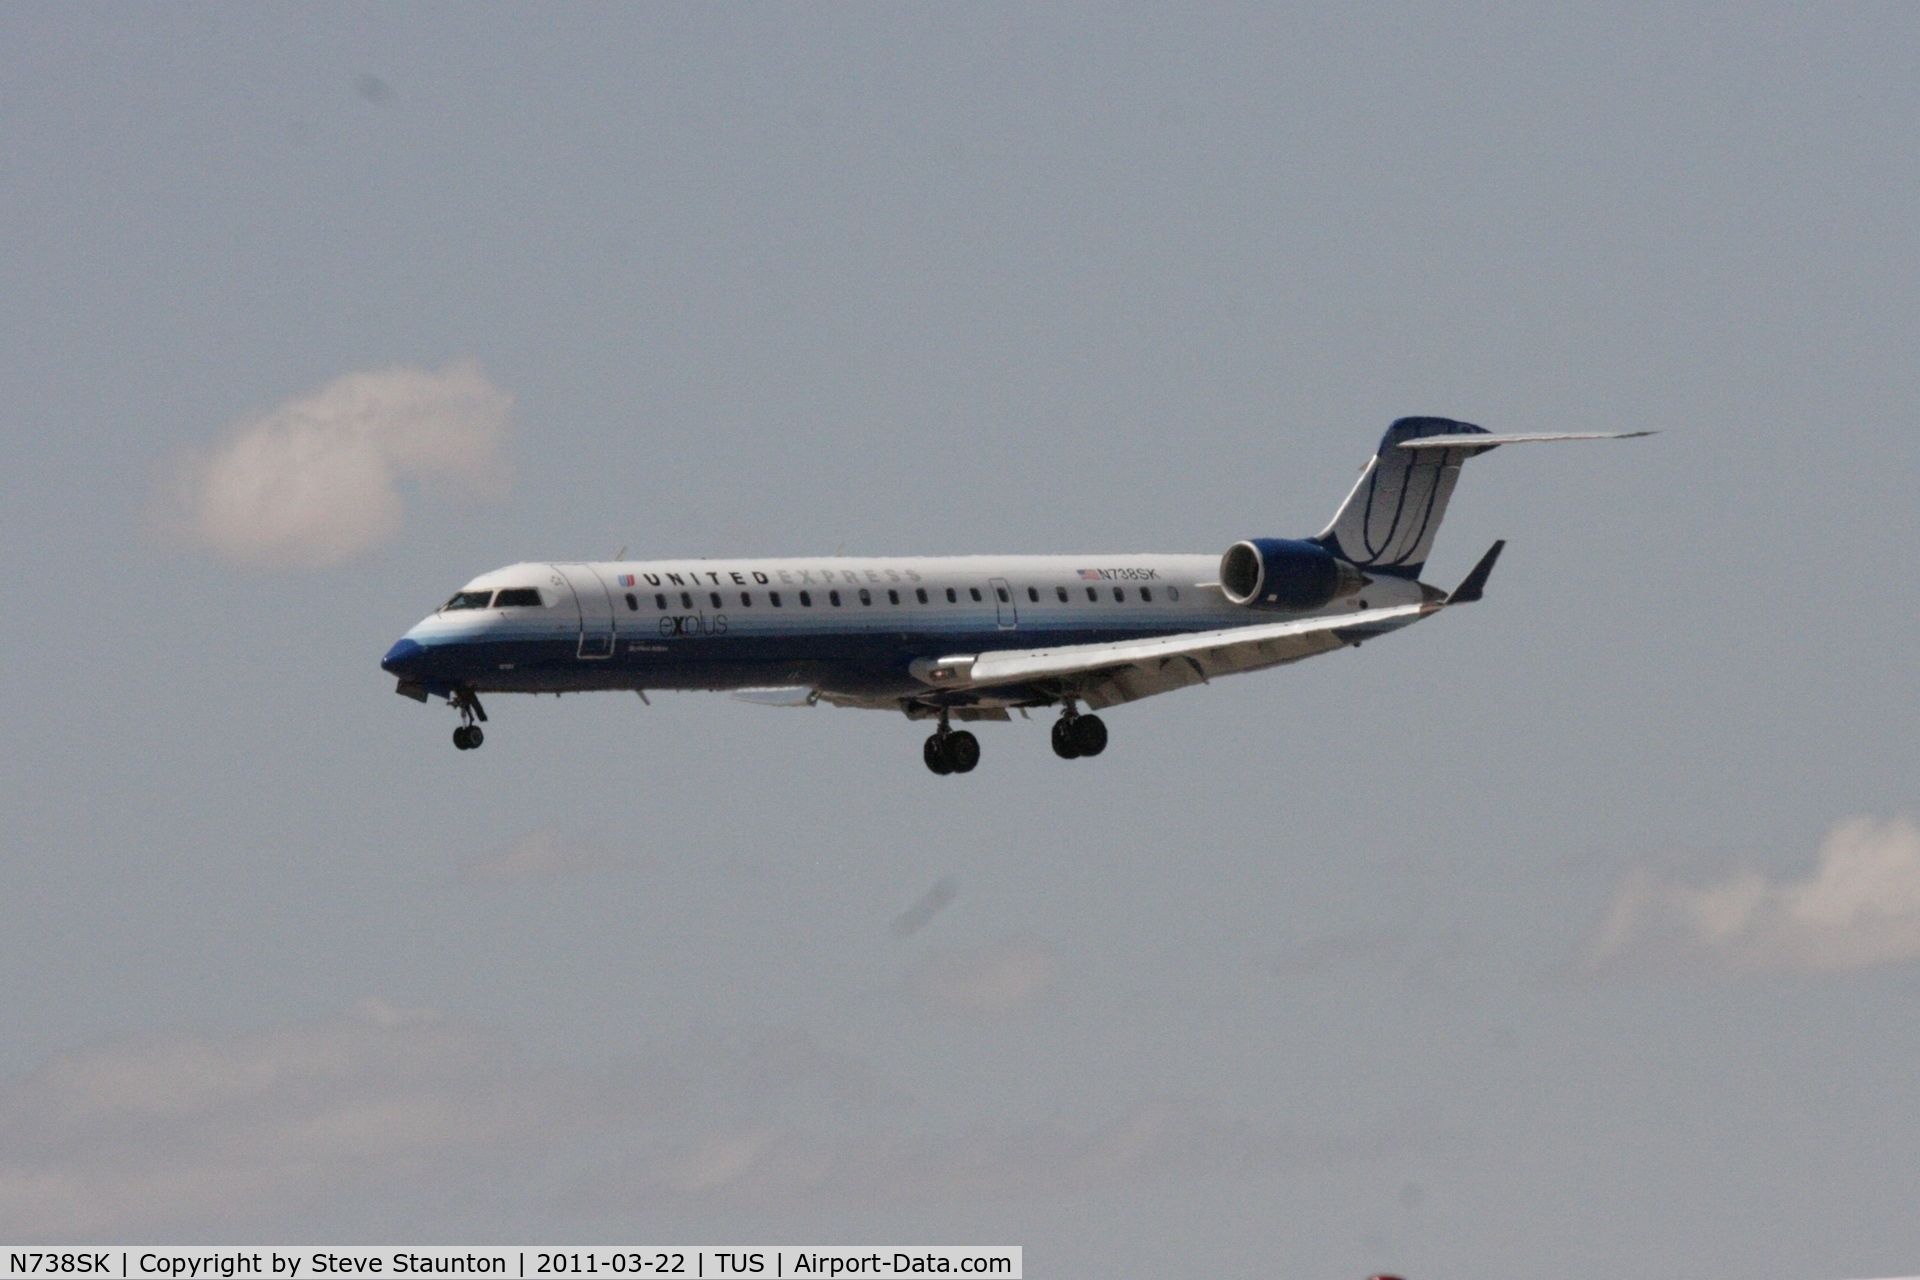 N738SK, 2005 Bombardier CRJ-700 (CL-600-2C10) Regional Jet C/N 10195, Taken at Tucson International Airport, in March 2011 whilst on an Aeroprint Aviation tour